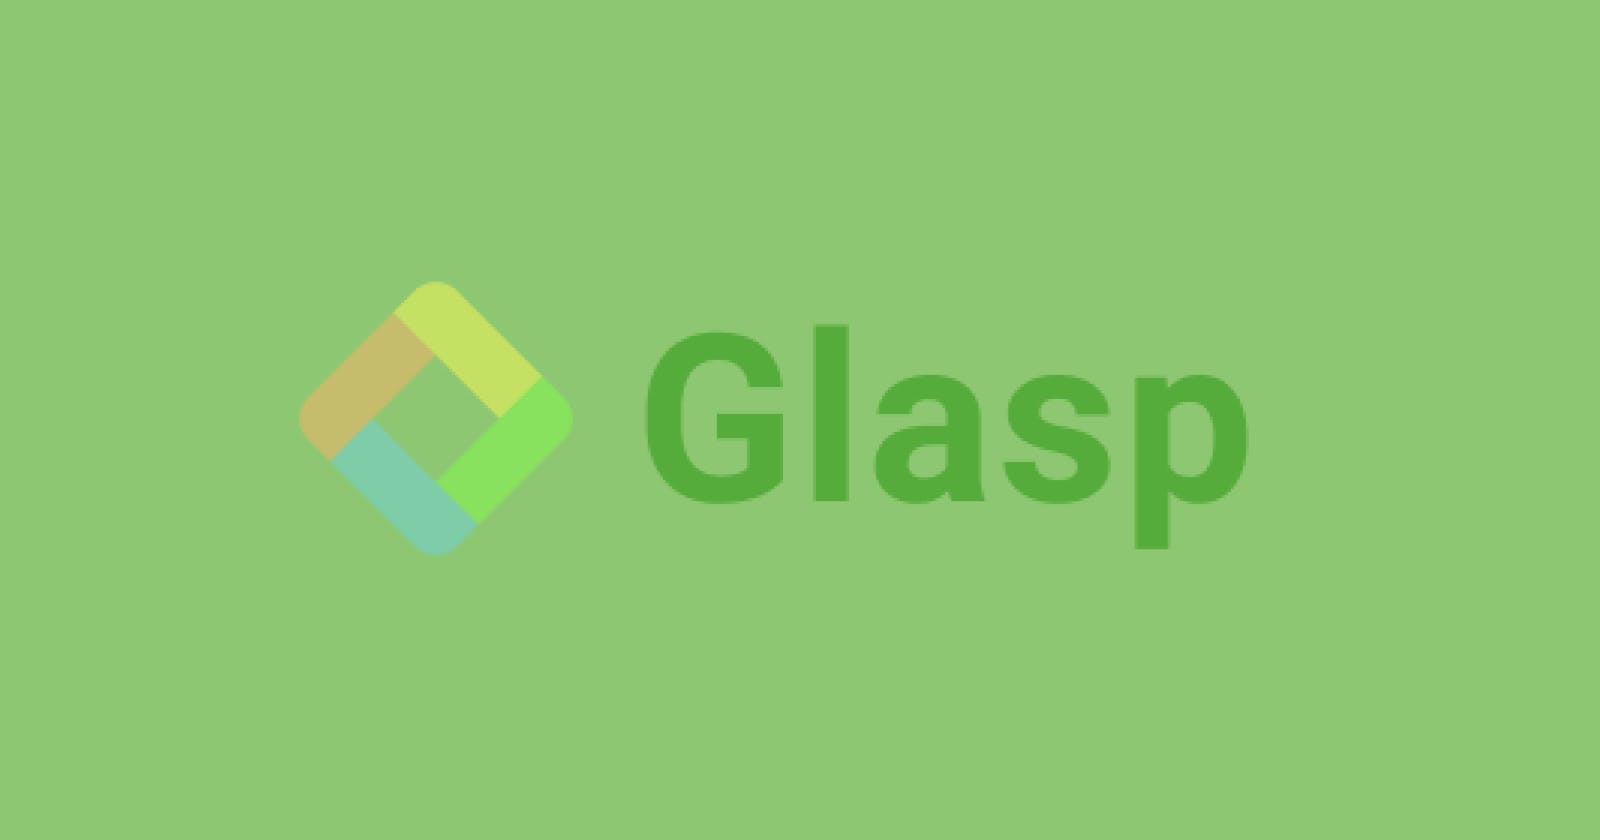 An Ultimate Guide to Glasp